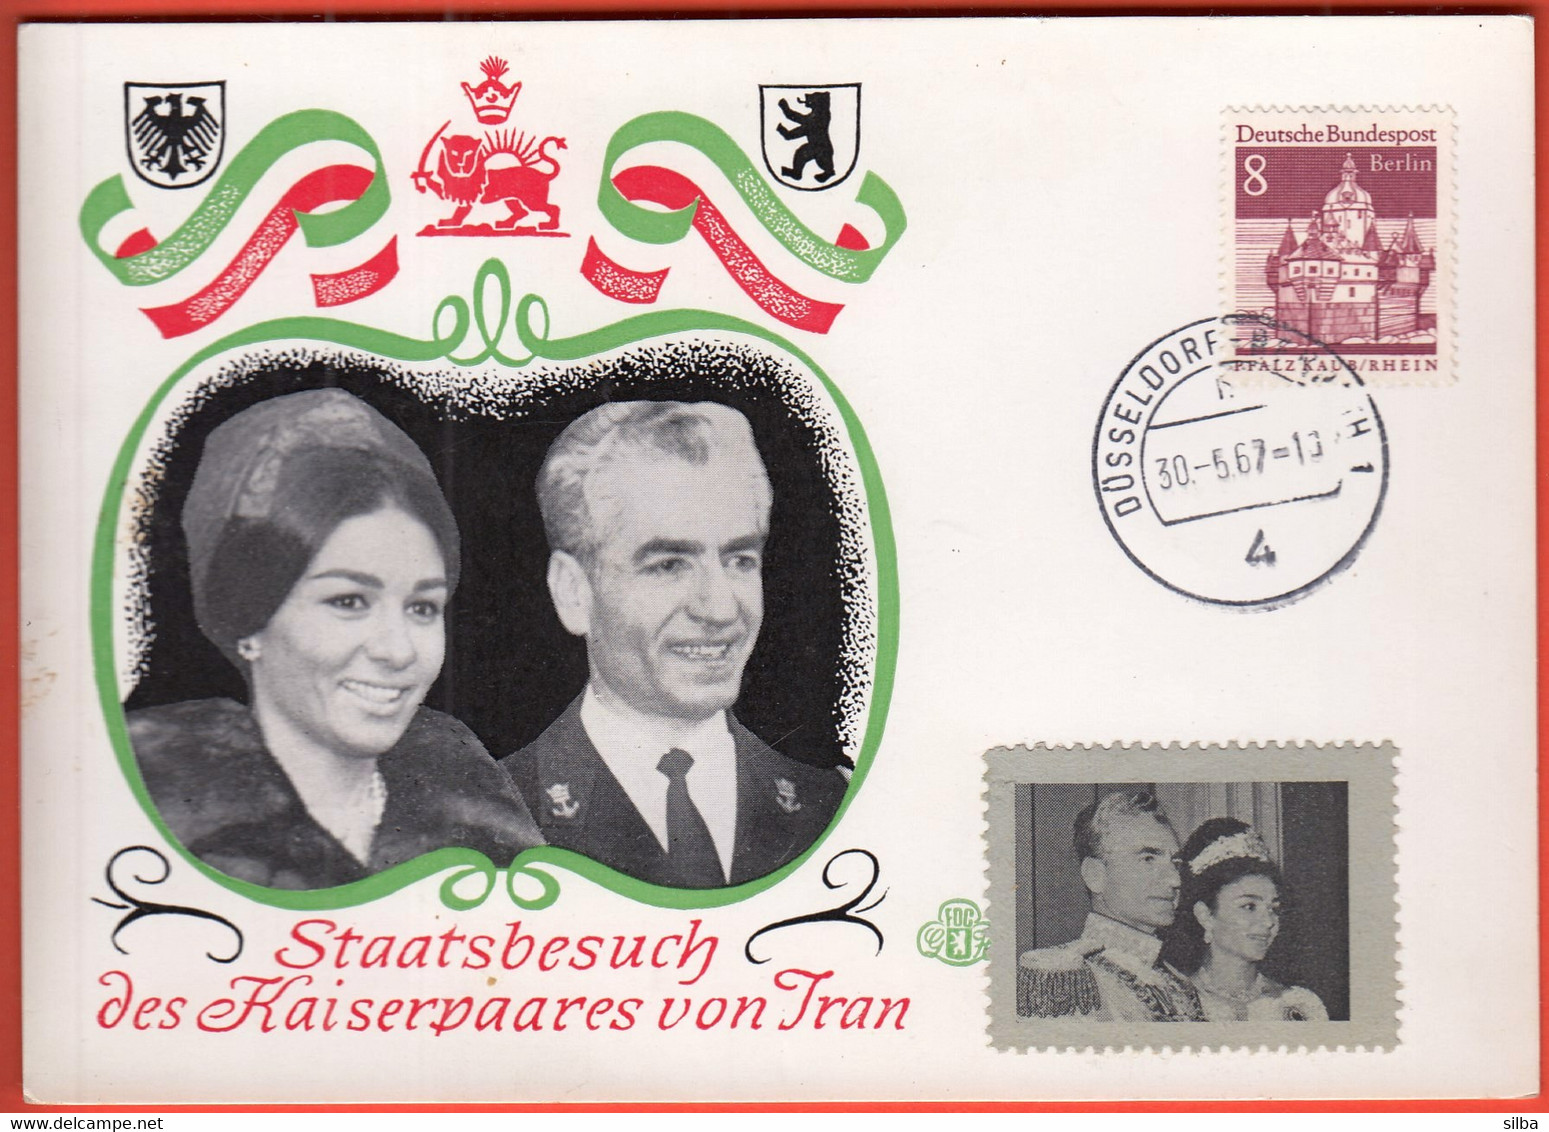 Germany Dusseldorf 1967 / Staatsbesuch Des Kaiserpaares Von Iran, State Visit Of The Imperial Couple Of Iran - Covers & Documents